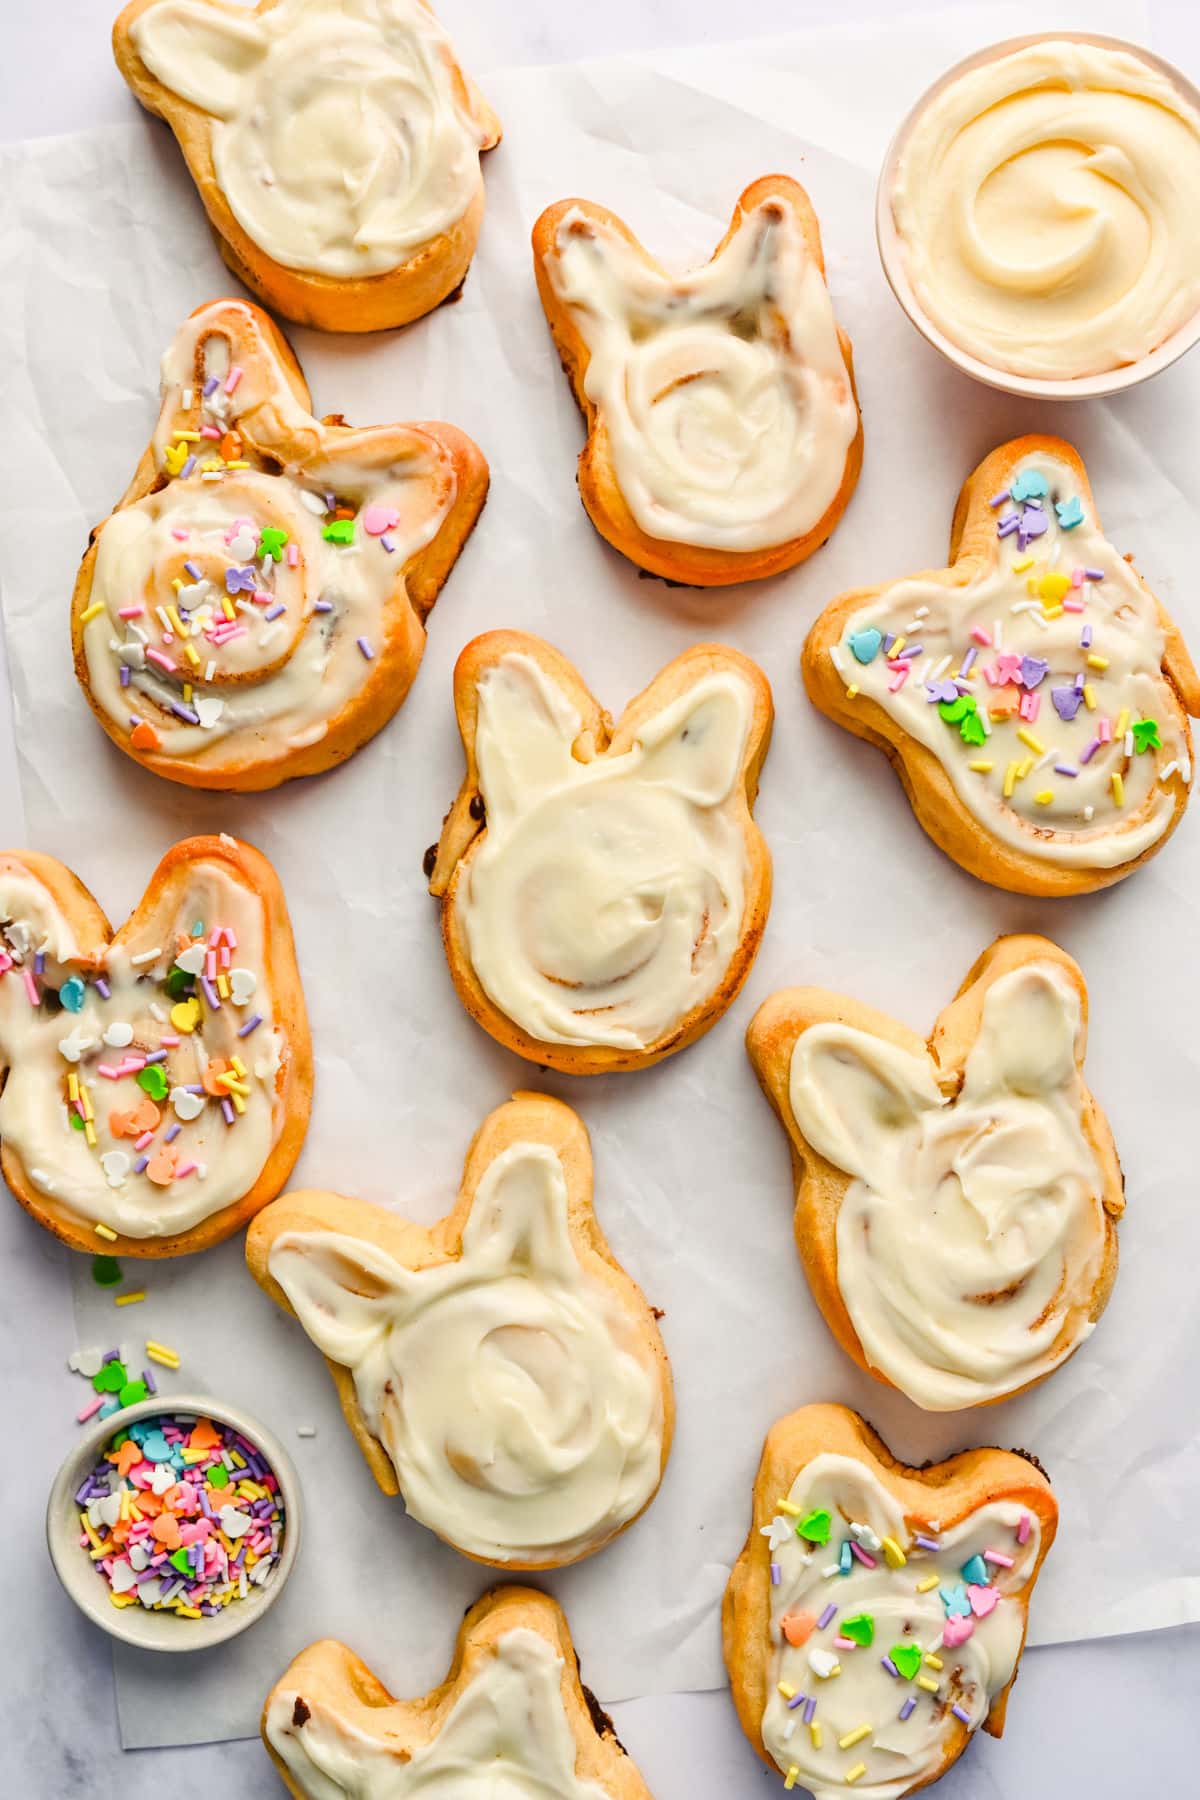 Easter bunny cinnamon rolls in a piece of parchment paper next to dishes of sprinkles and frosting.